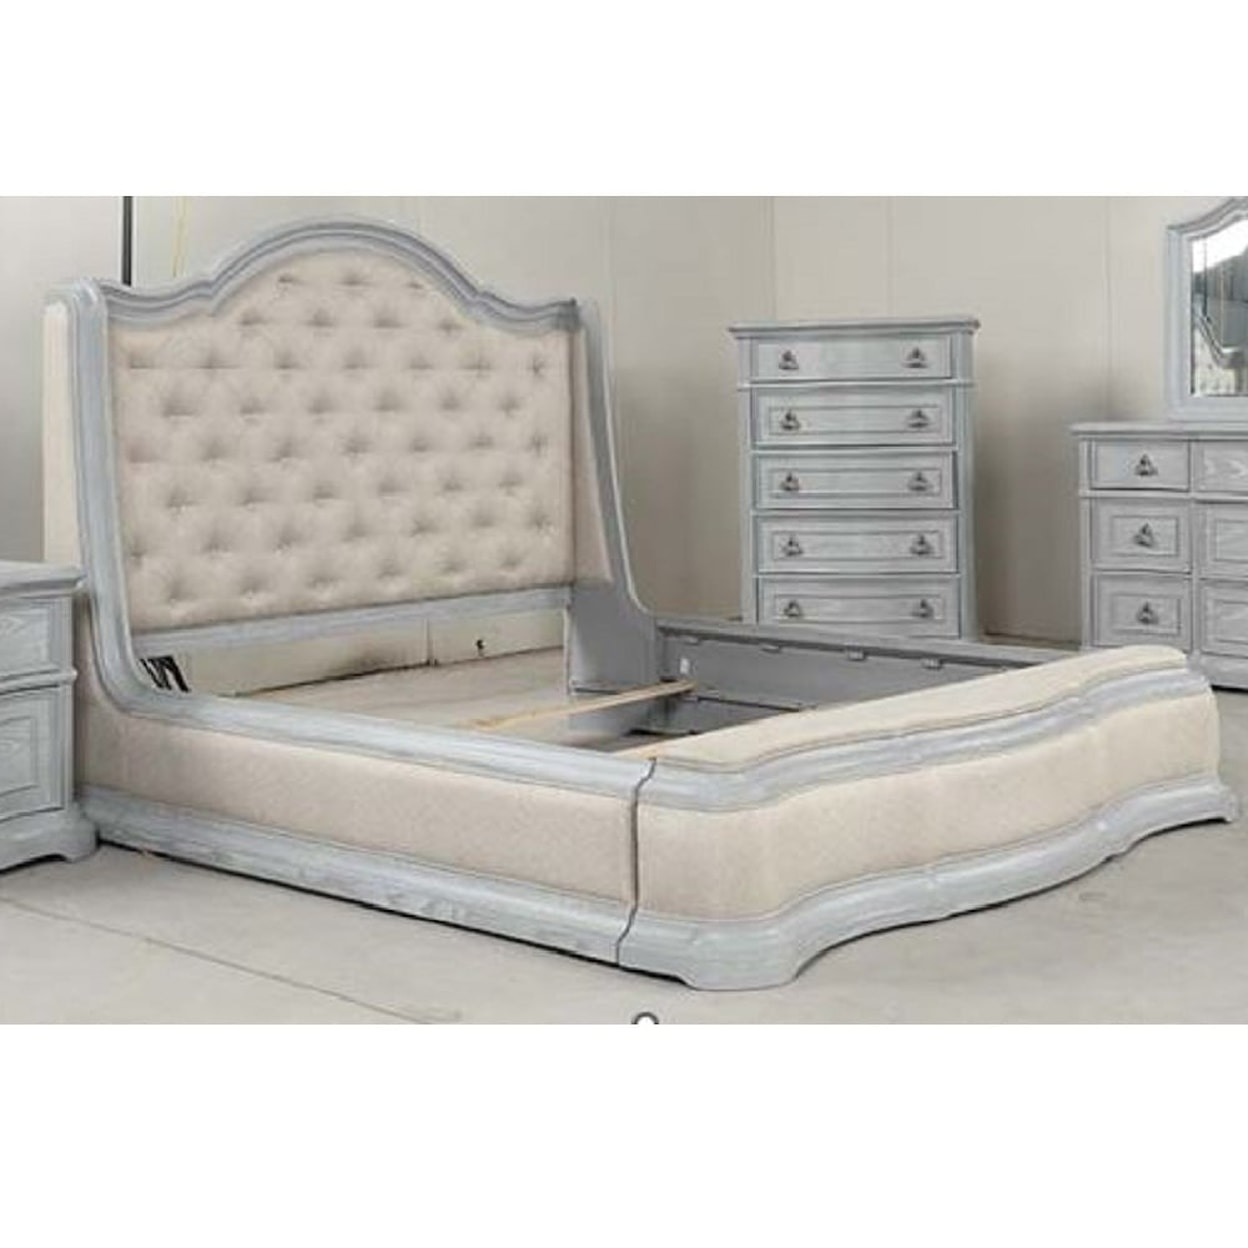 Acme Furniture Esdras King Bed